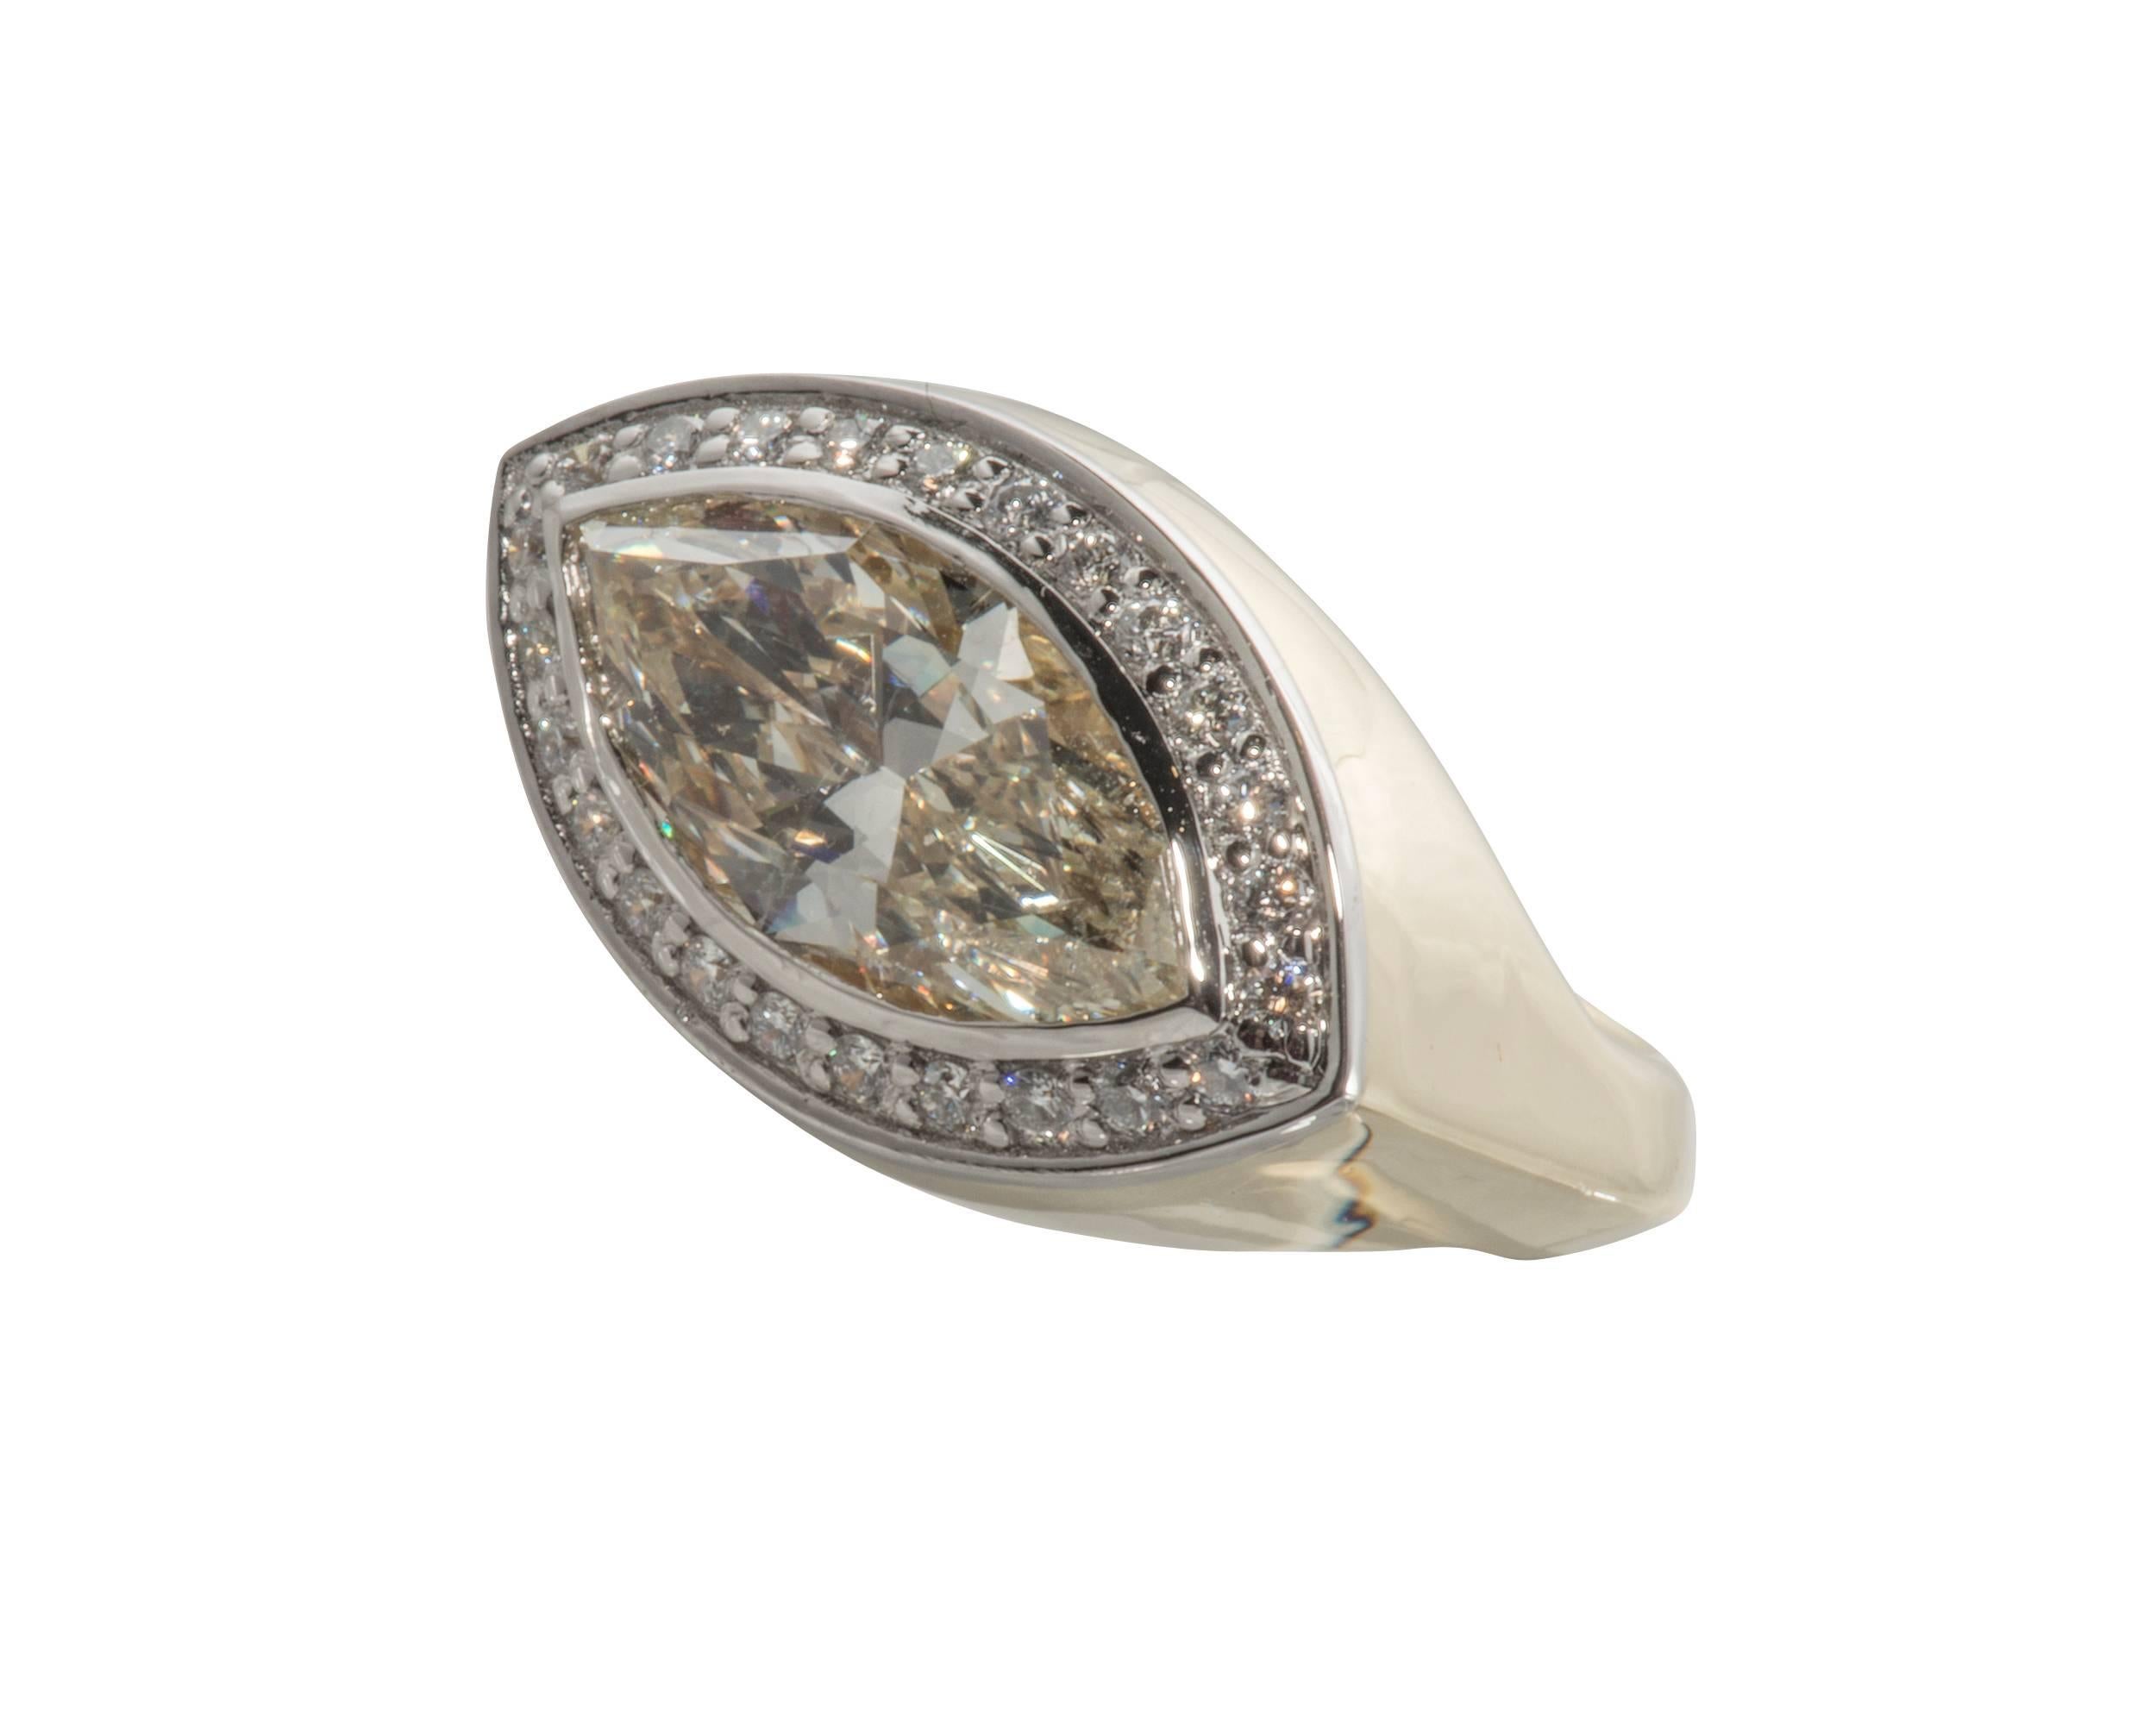 This is a beautiful yellow marquis diamond cocktail ring set in 18k yellow gold and platinum.  It is a size 6 1/2 but can easily be resized.